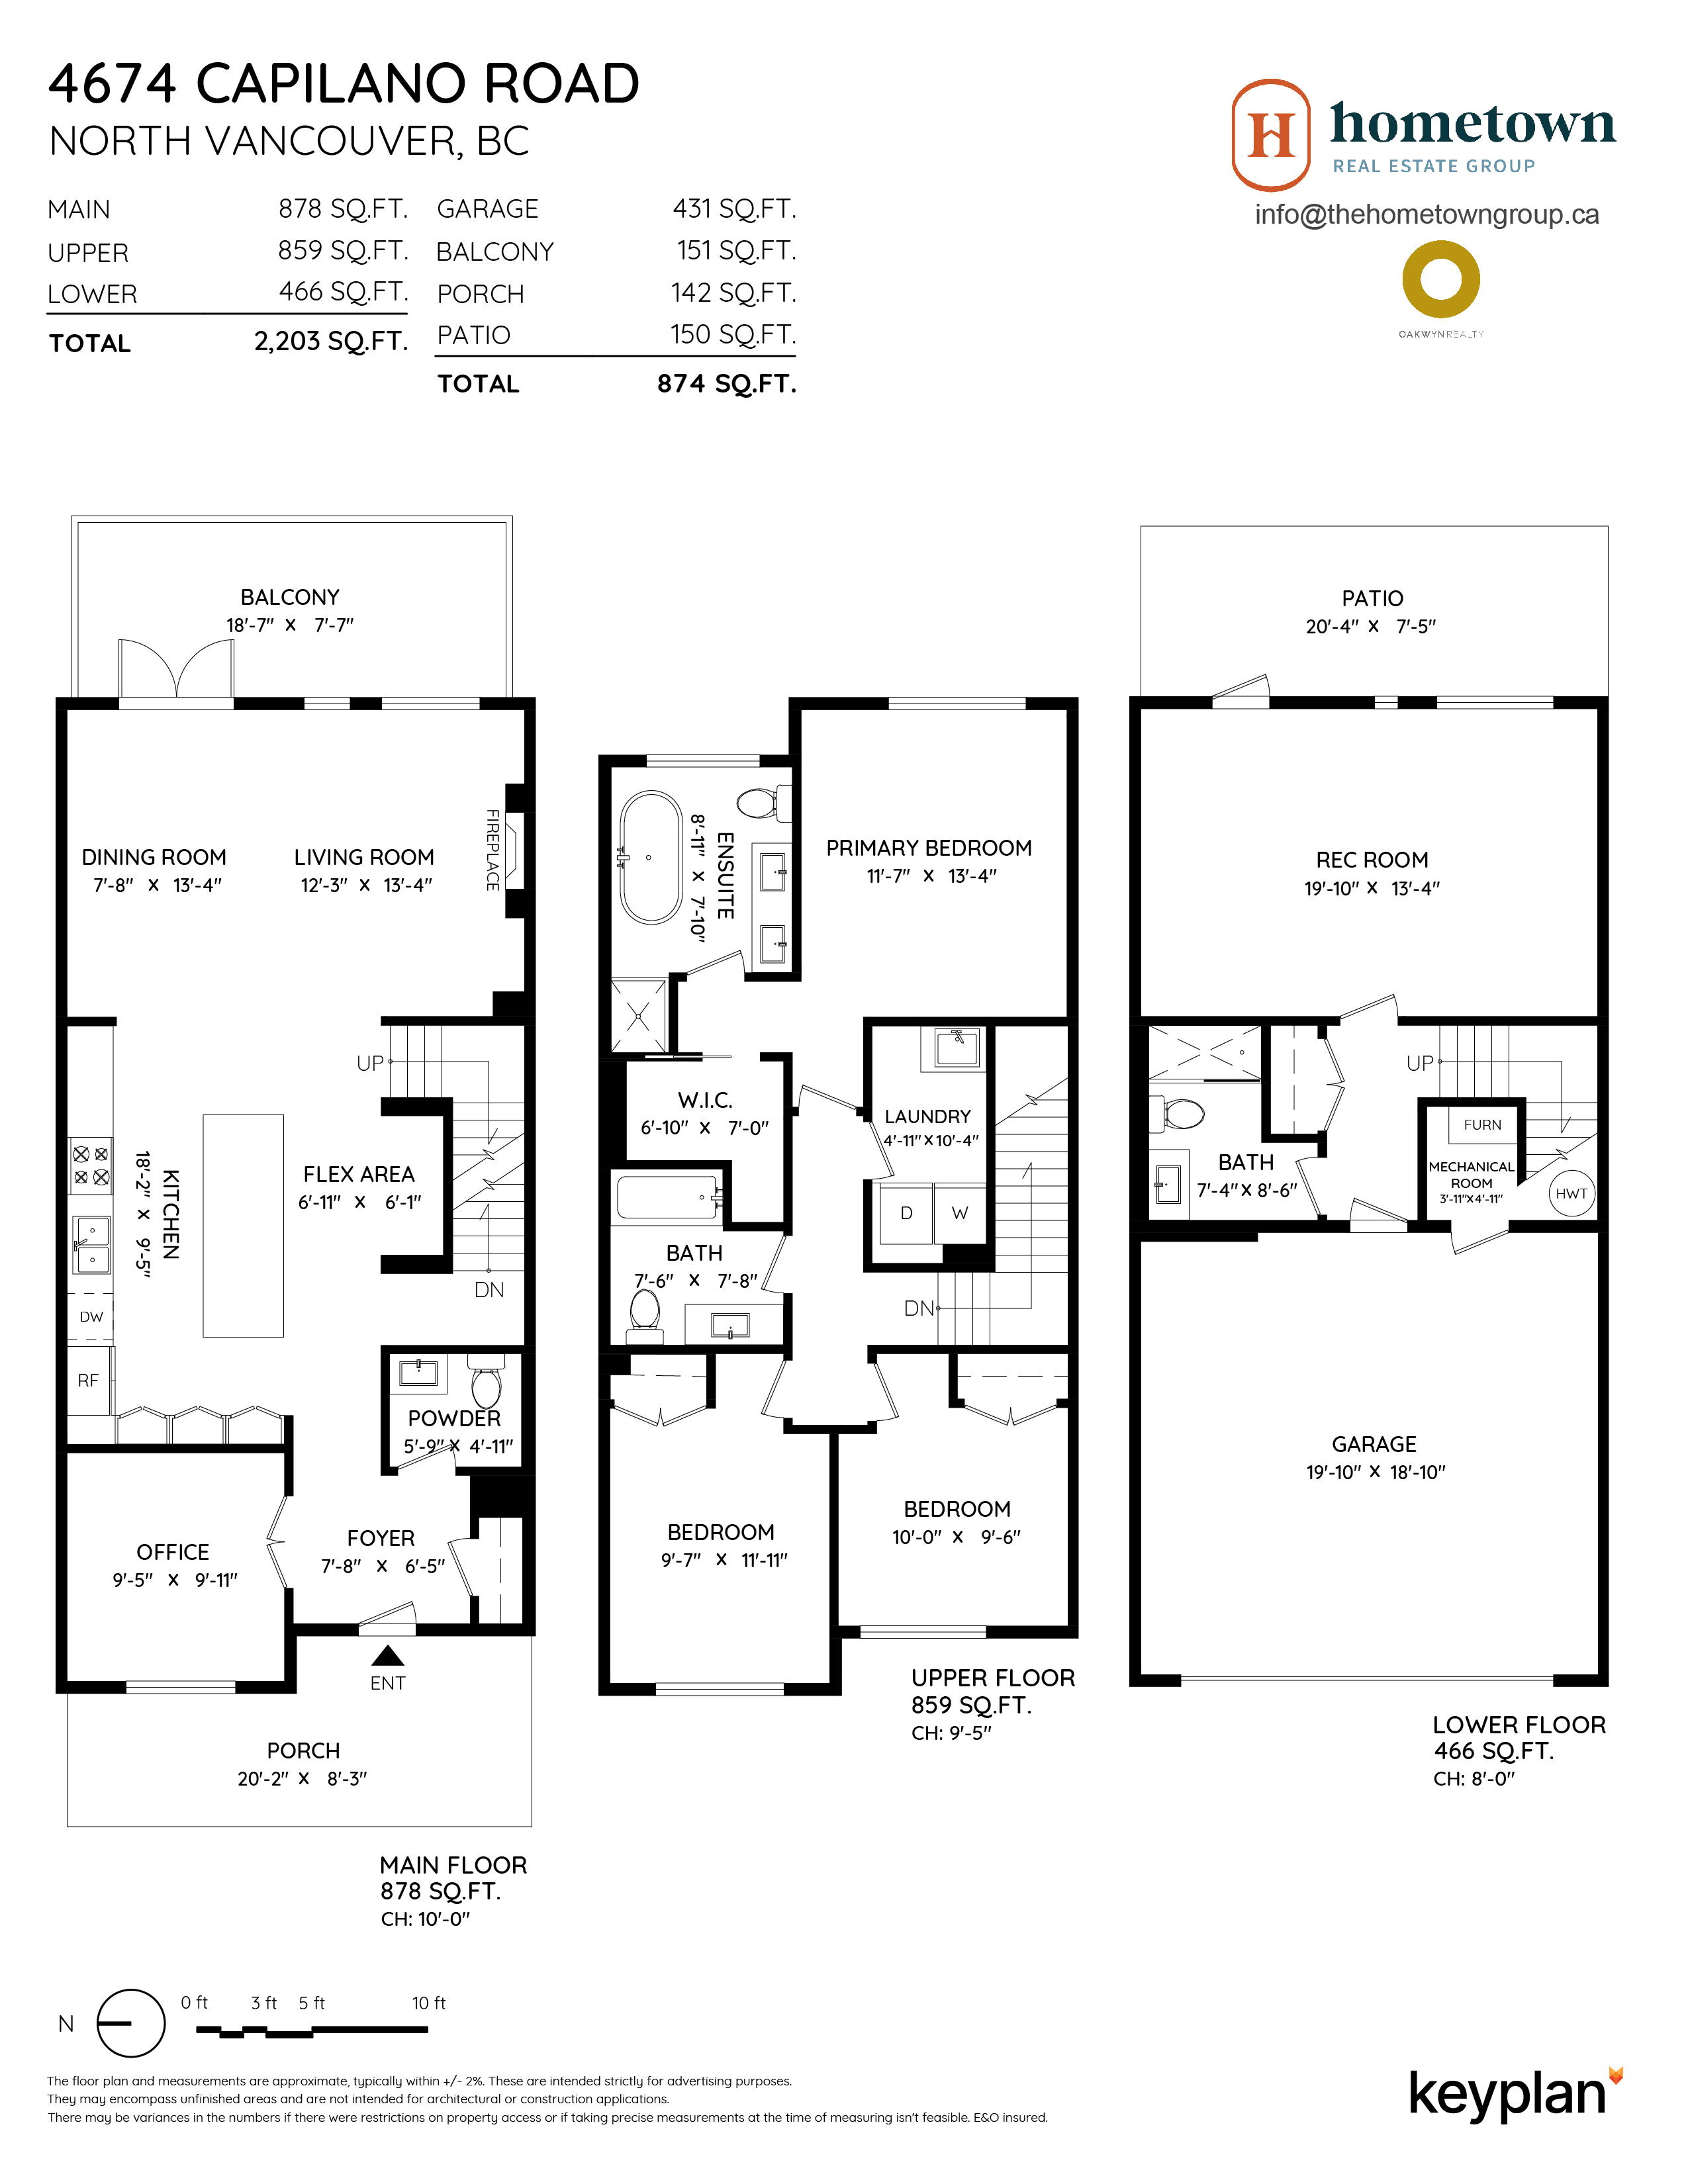 The Hometown Group - 4674 Capilano Road, North Vancouver, BC, Canada | Floor Plan 1